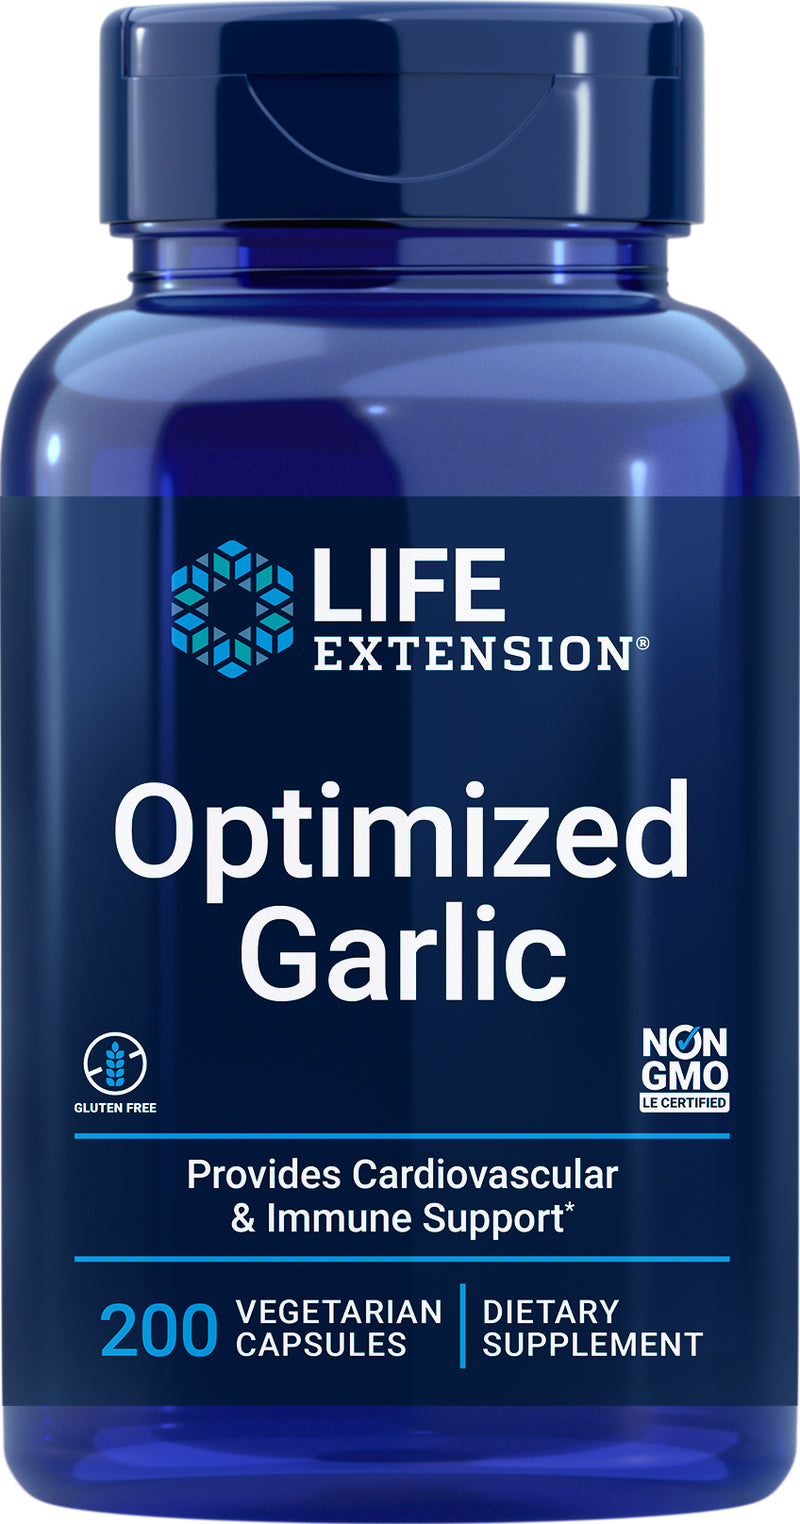 Optimized Garlic 200 Veg Caps by Life Extension